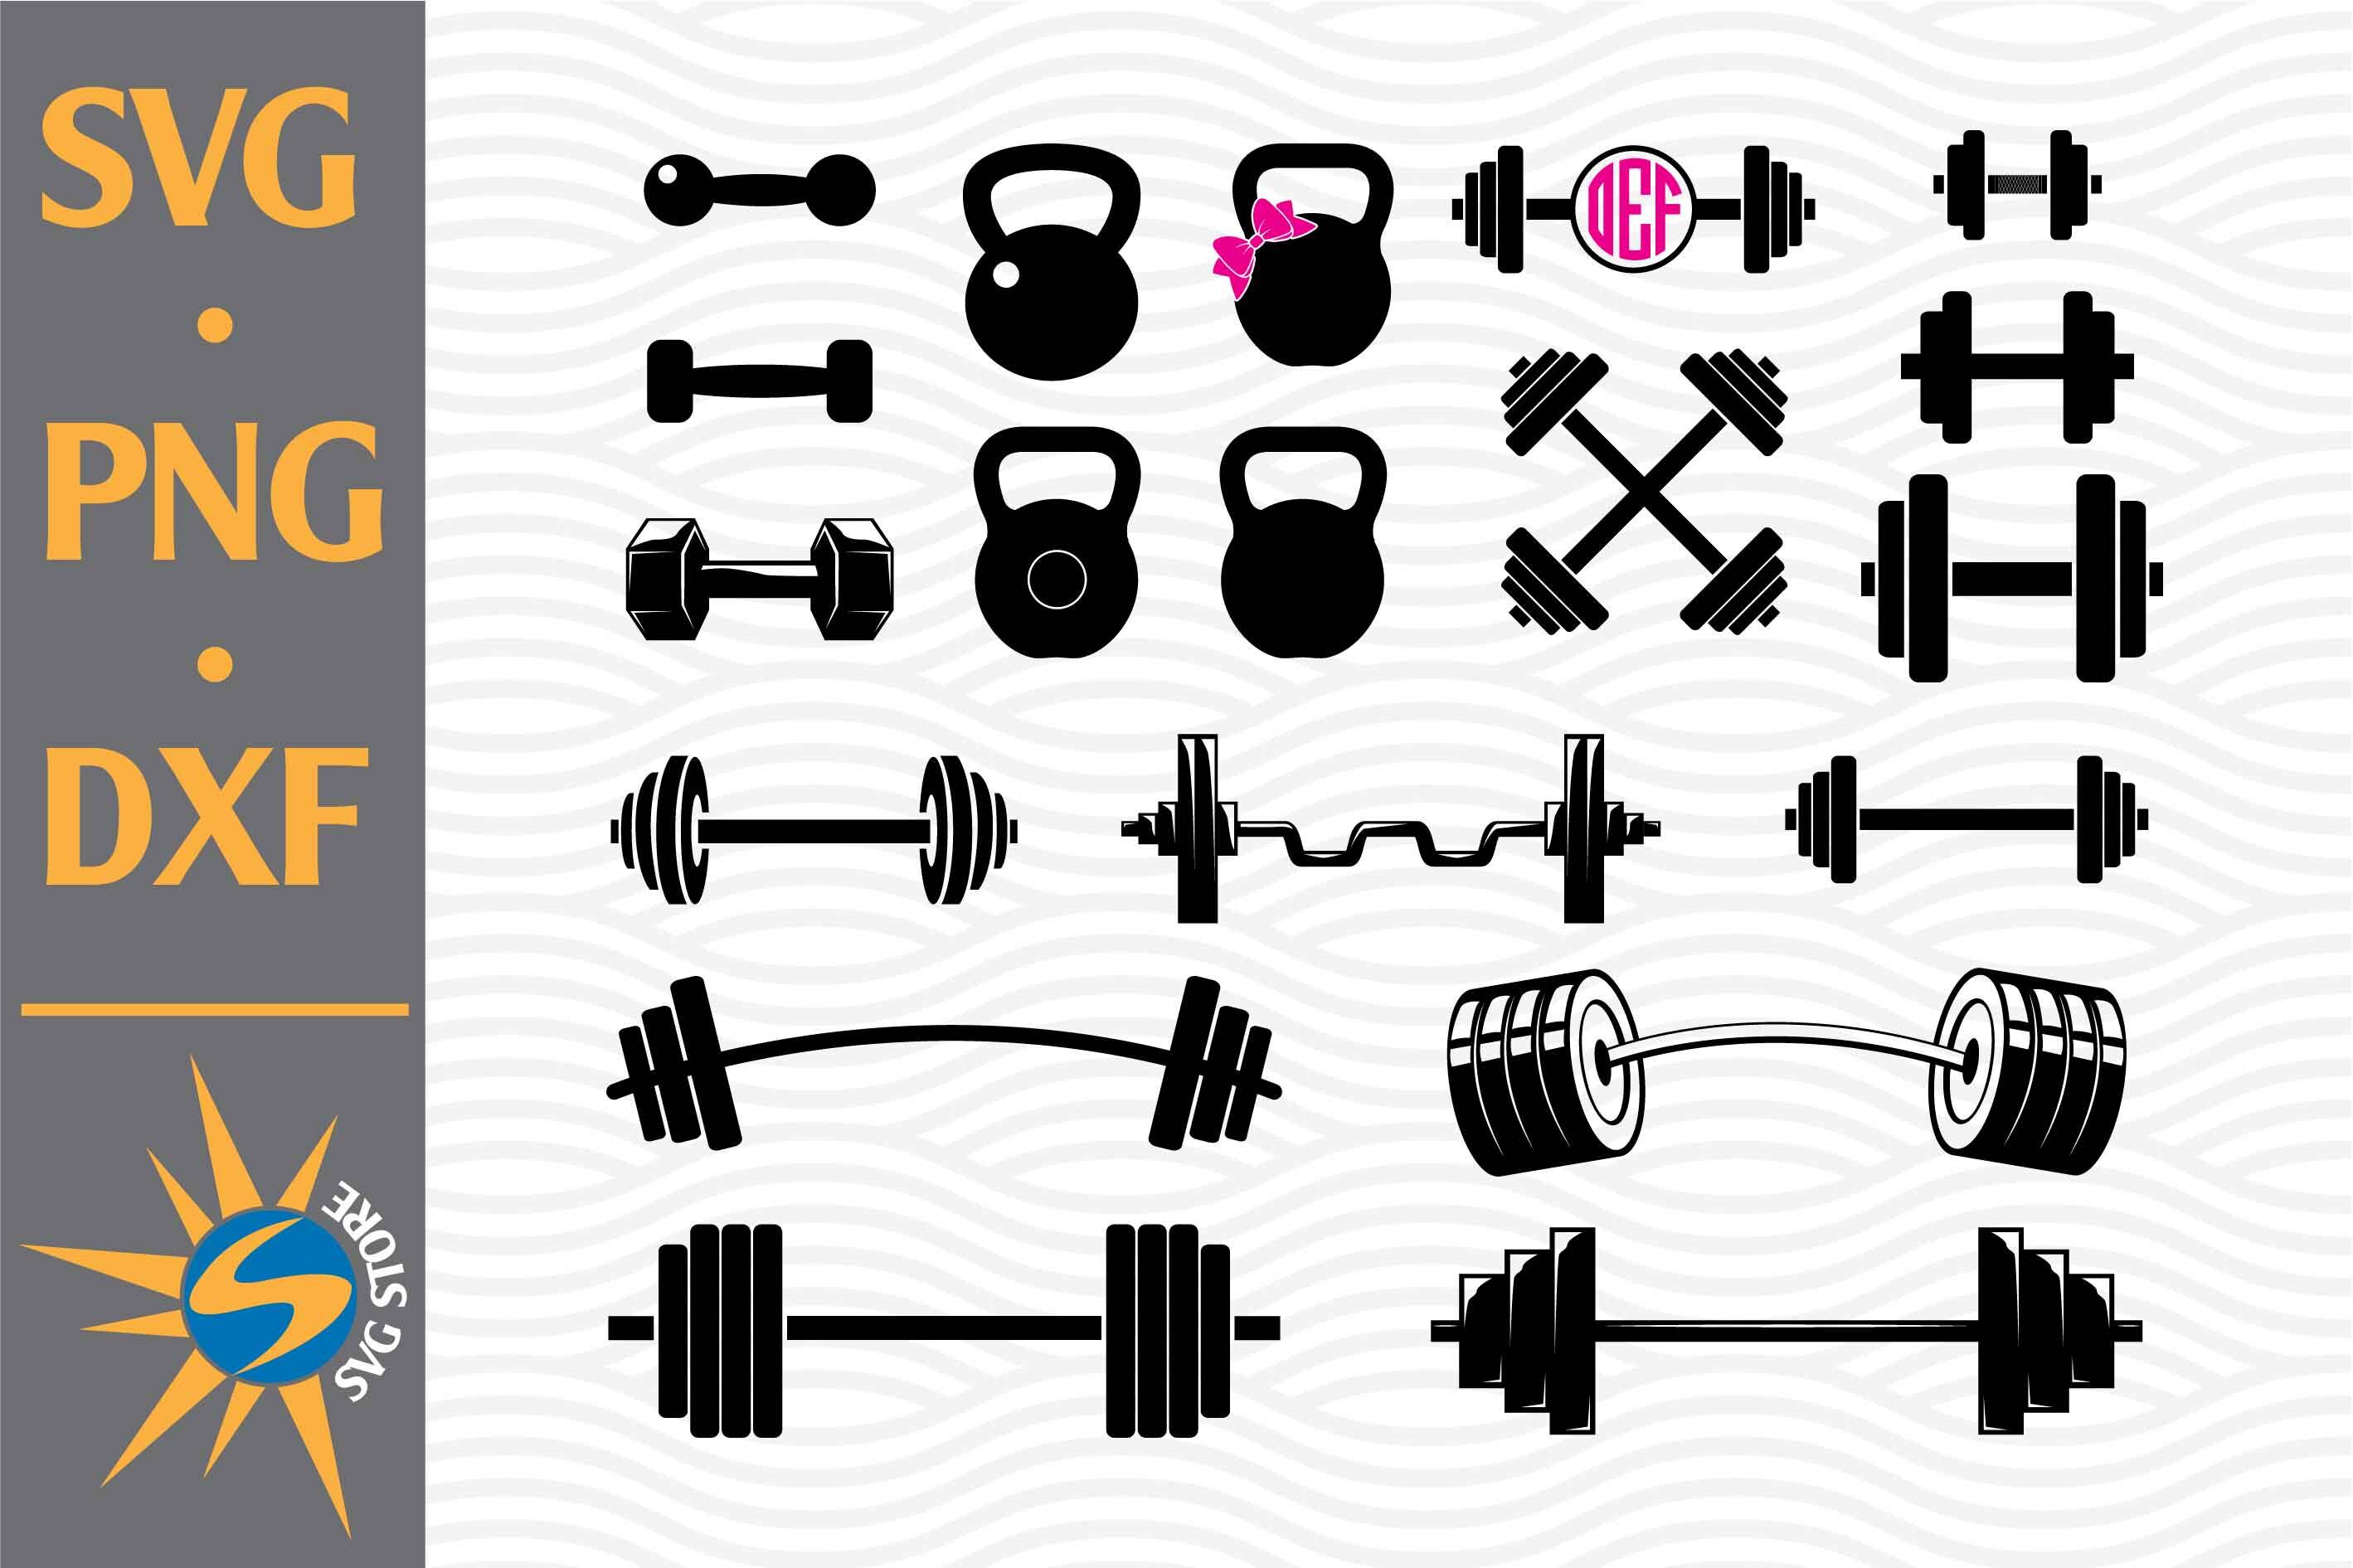 Barbell Silhouette SVG, PNG, DXF Digital Files Include By SVGStoreShop